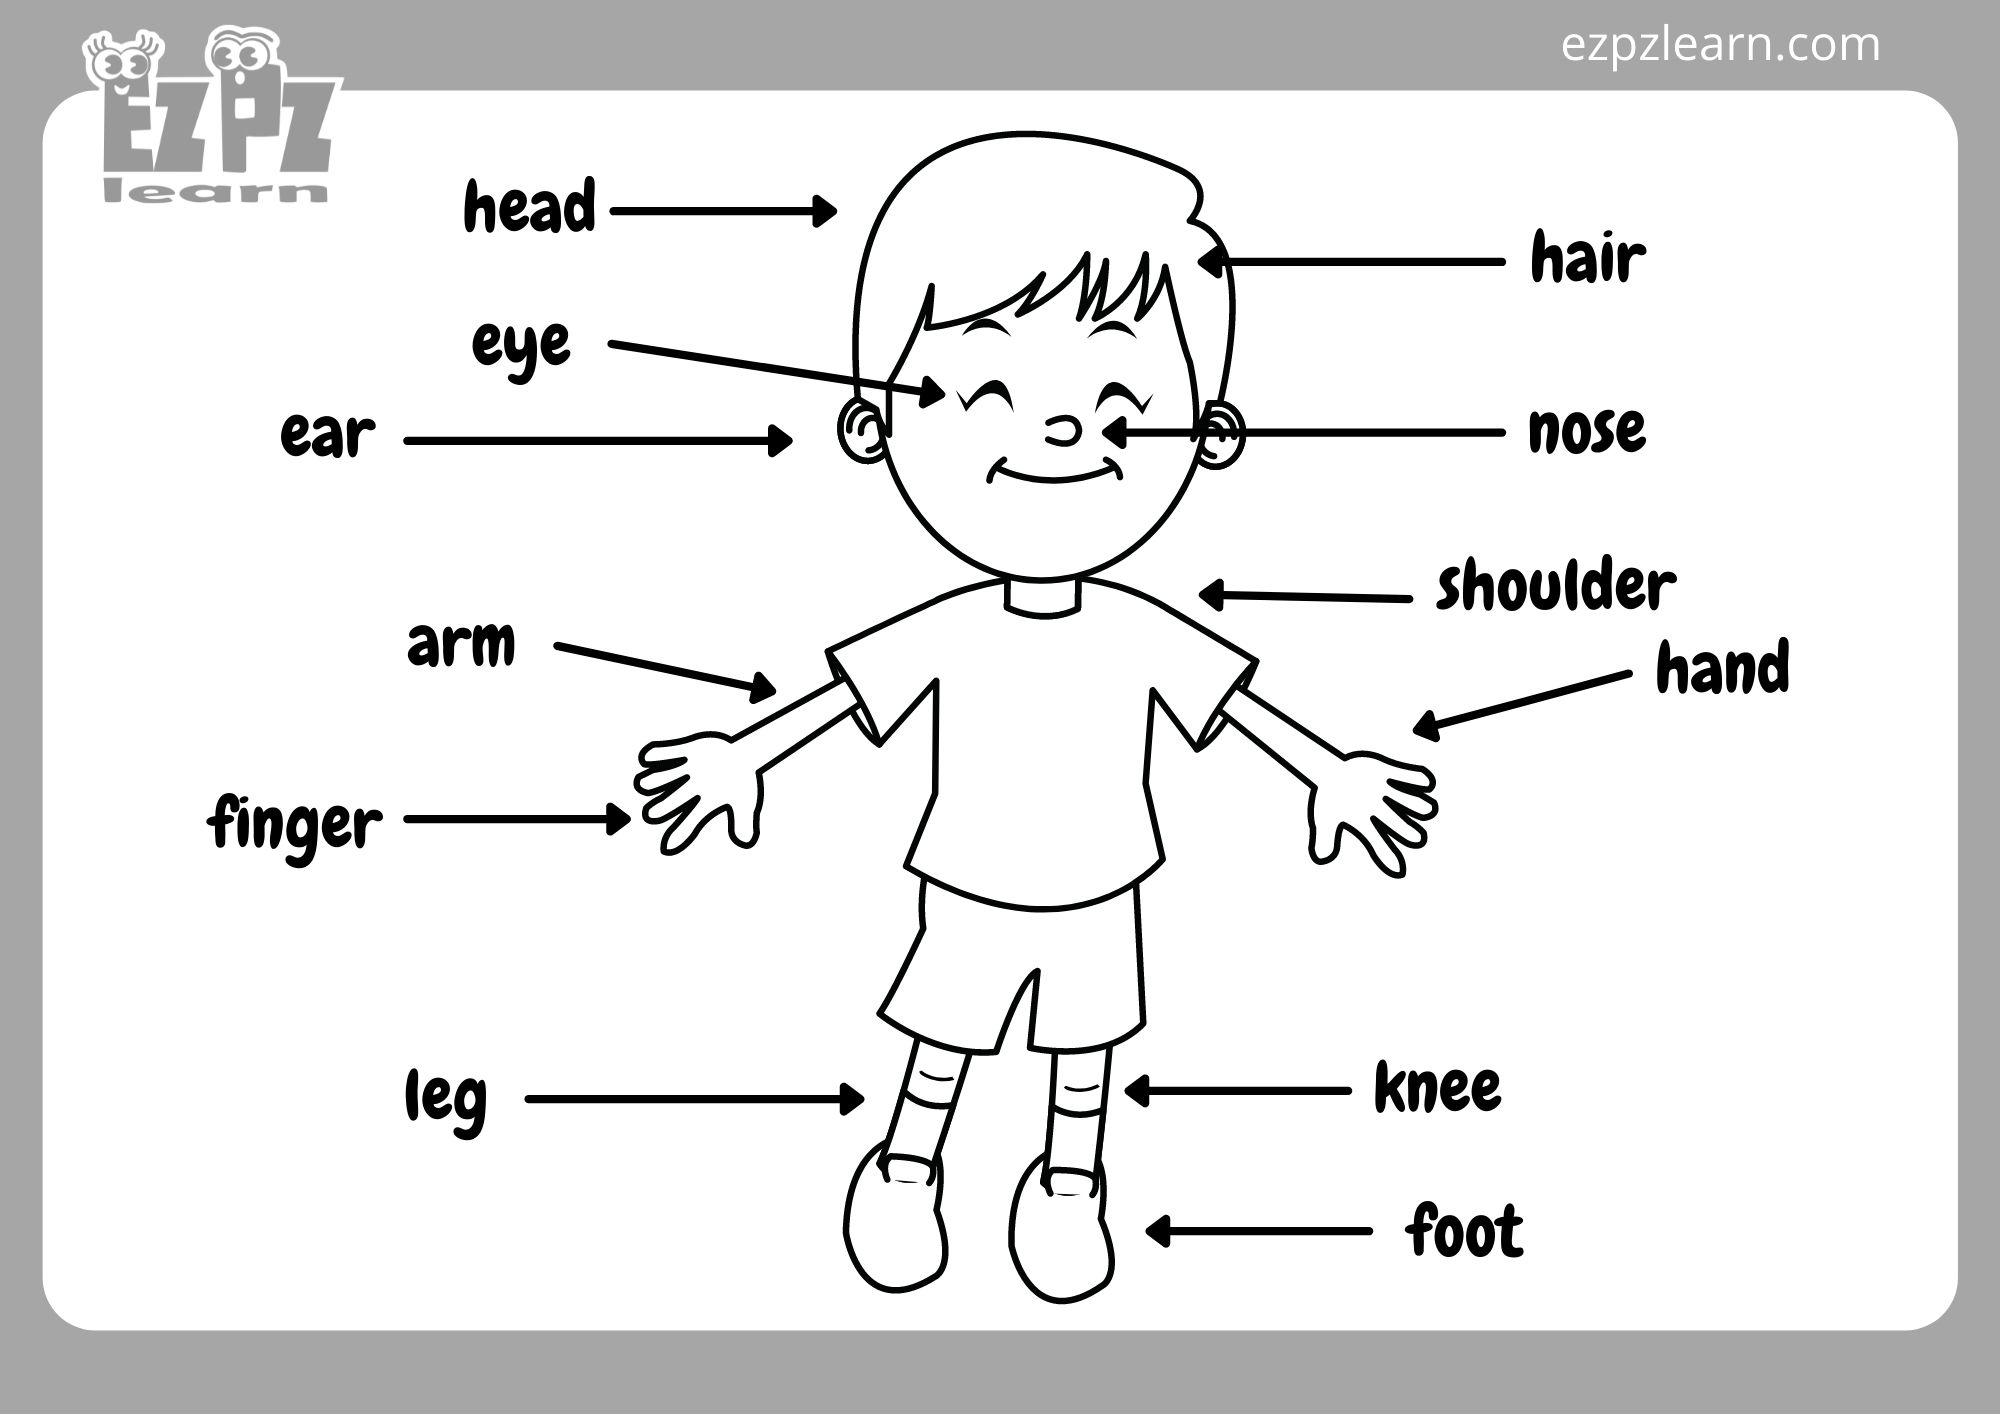 body-parts-coloring-page-ezpzlearn